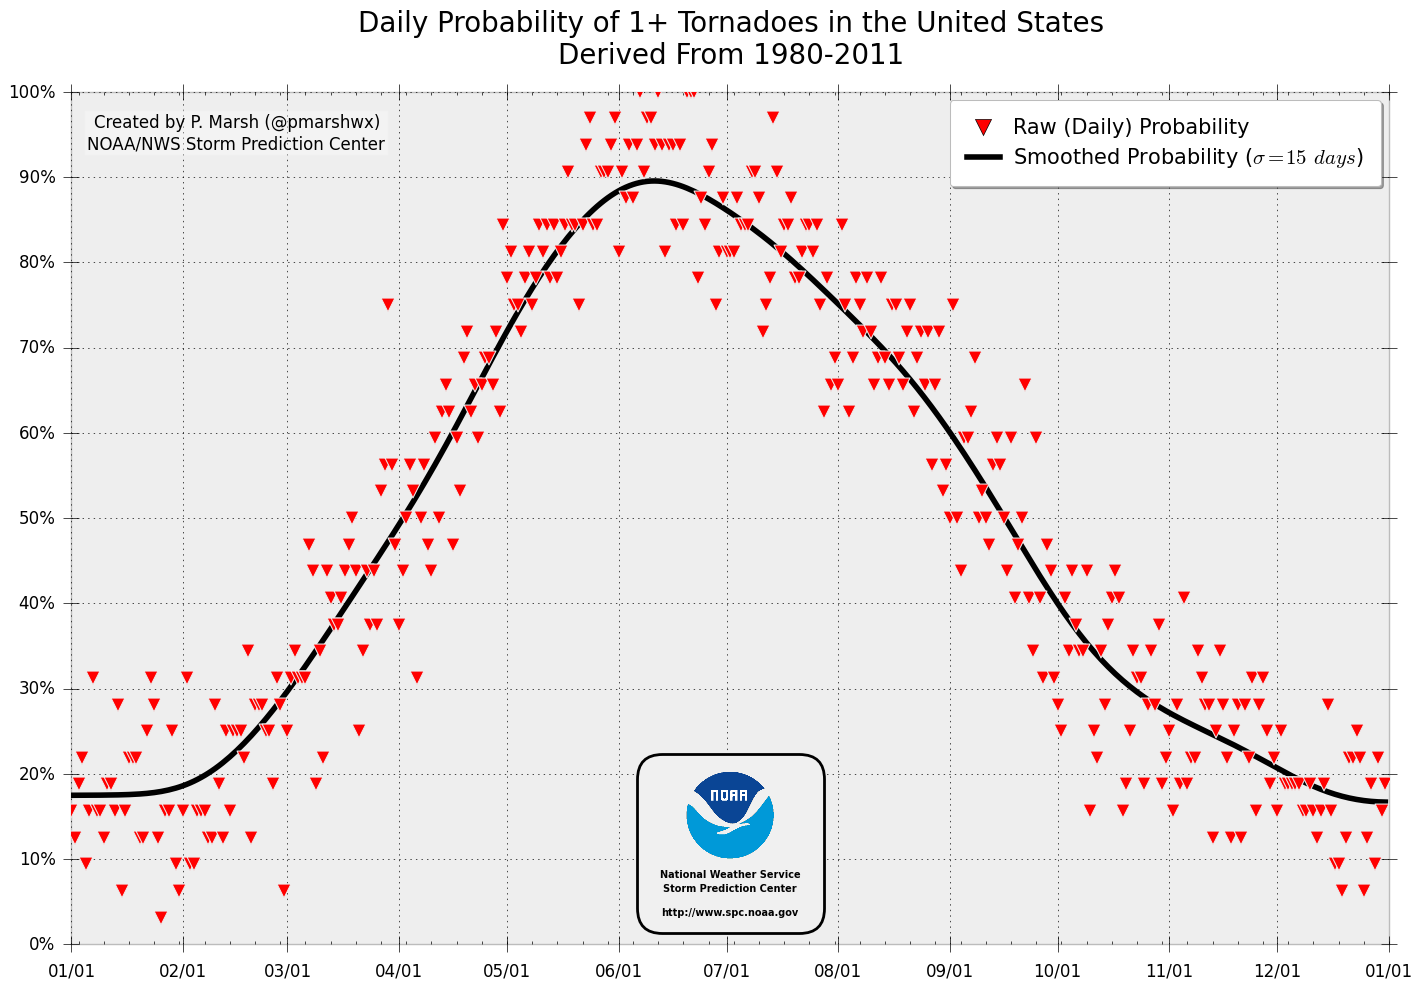 Daily Probability of a Tornado Anywhere in U.S., based on 33 years of historical data